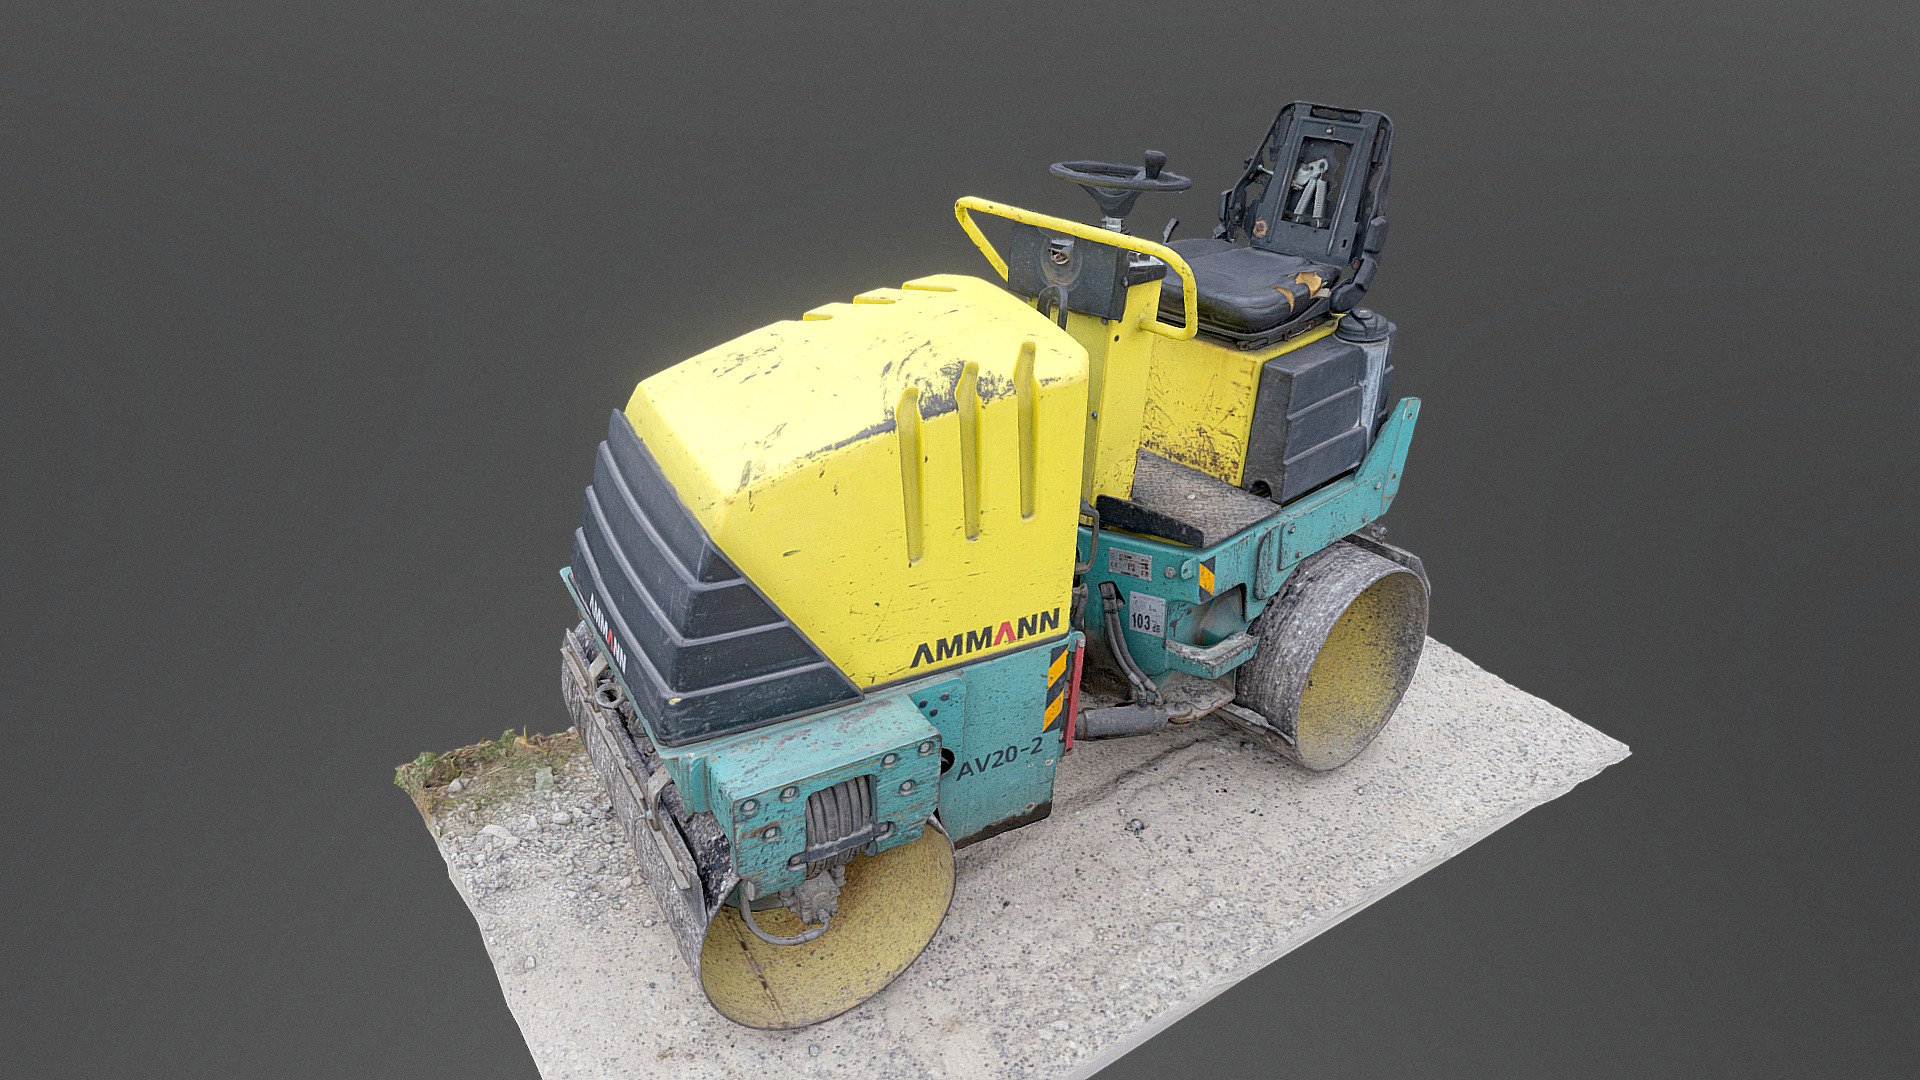 Asphalt paver compactor drum roller road construction vehicle machine

Photogrammetry scan 250x24MP,  2x16K textures - Asphalt paver compactor drum roller vehicle - Buy Royalty Free 3D model by matousekfoto 3d model